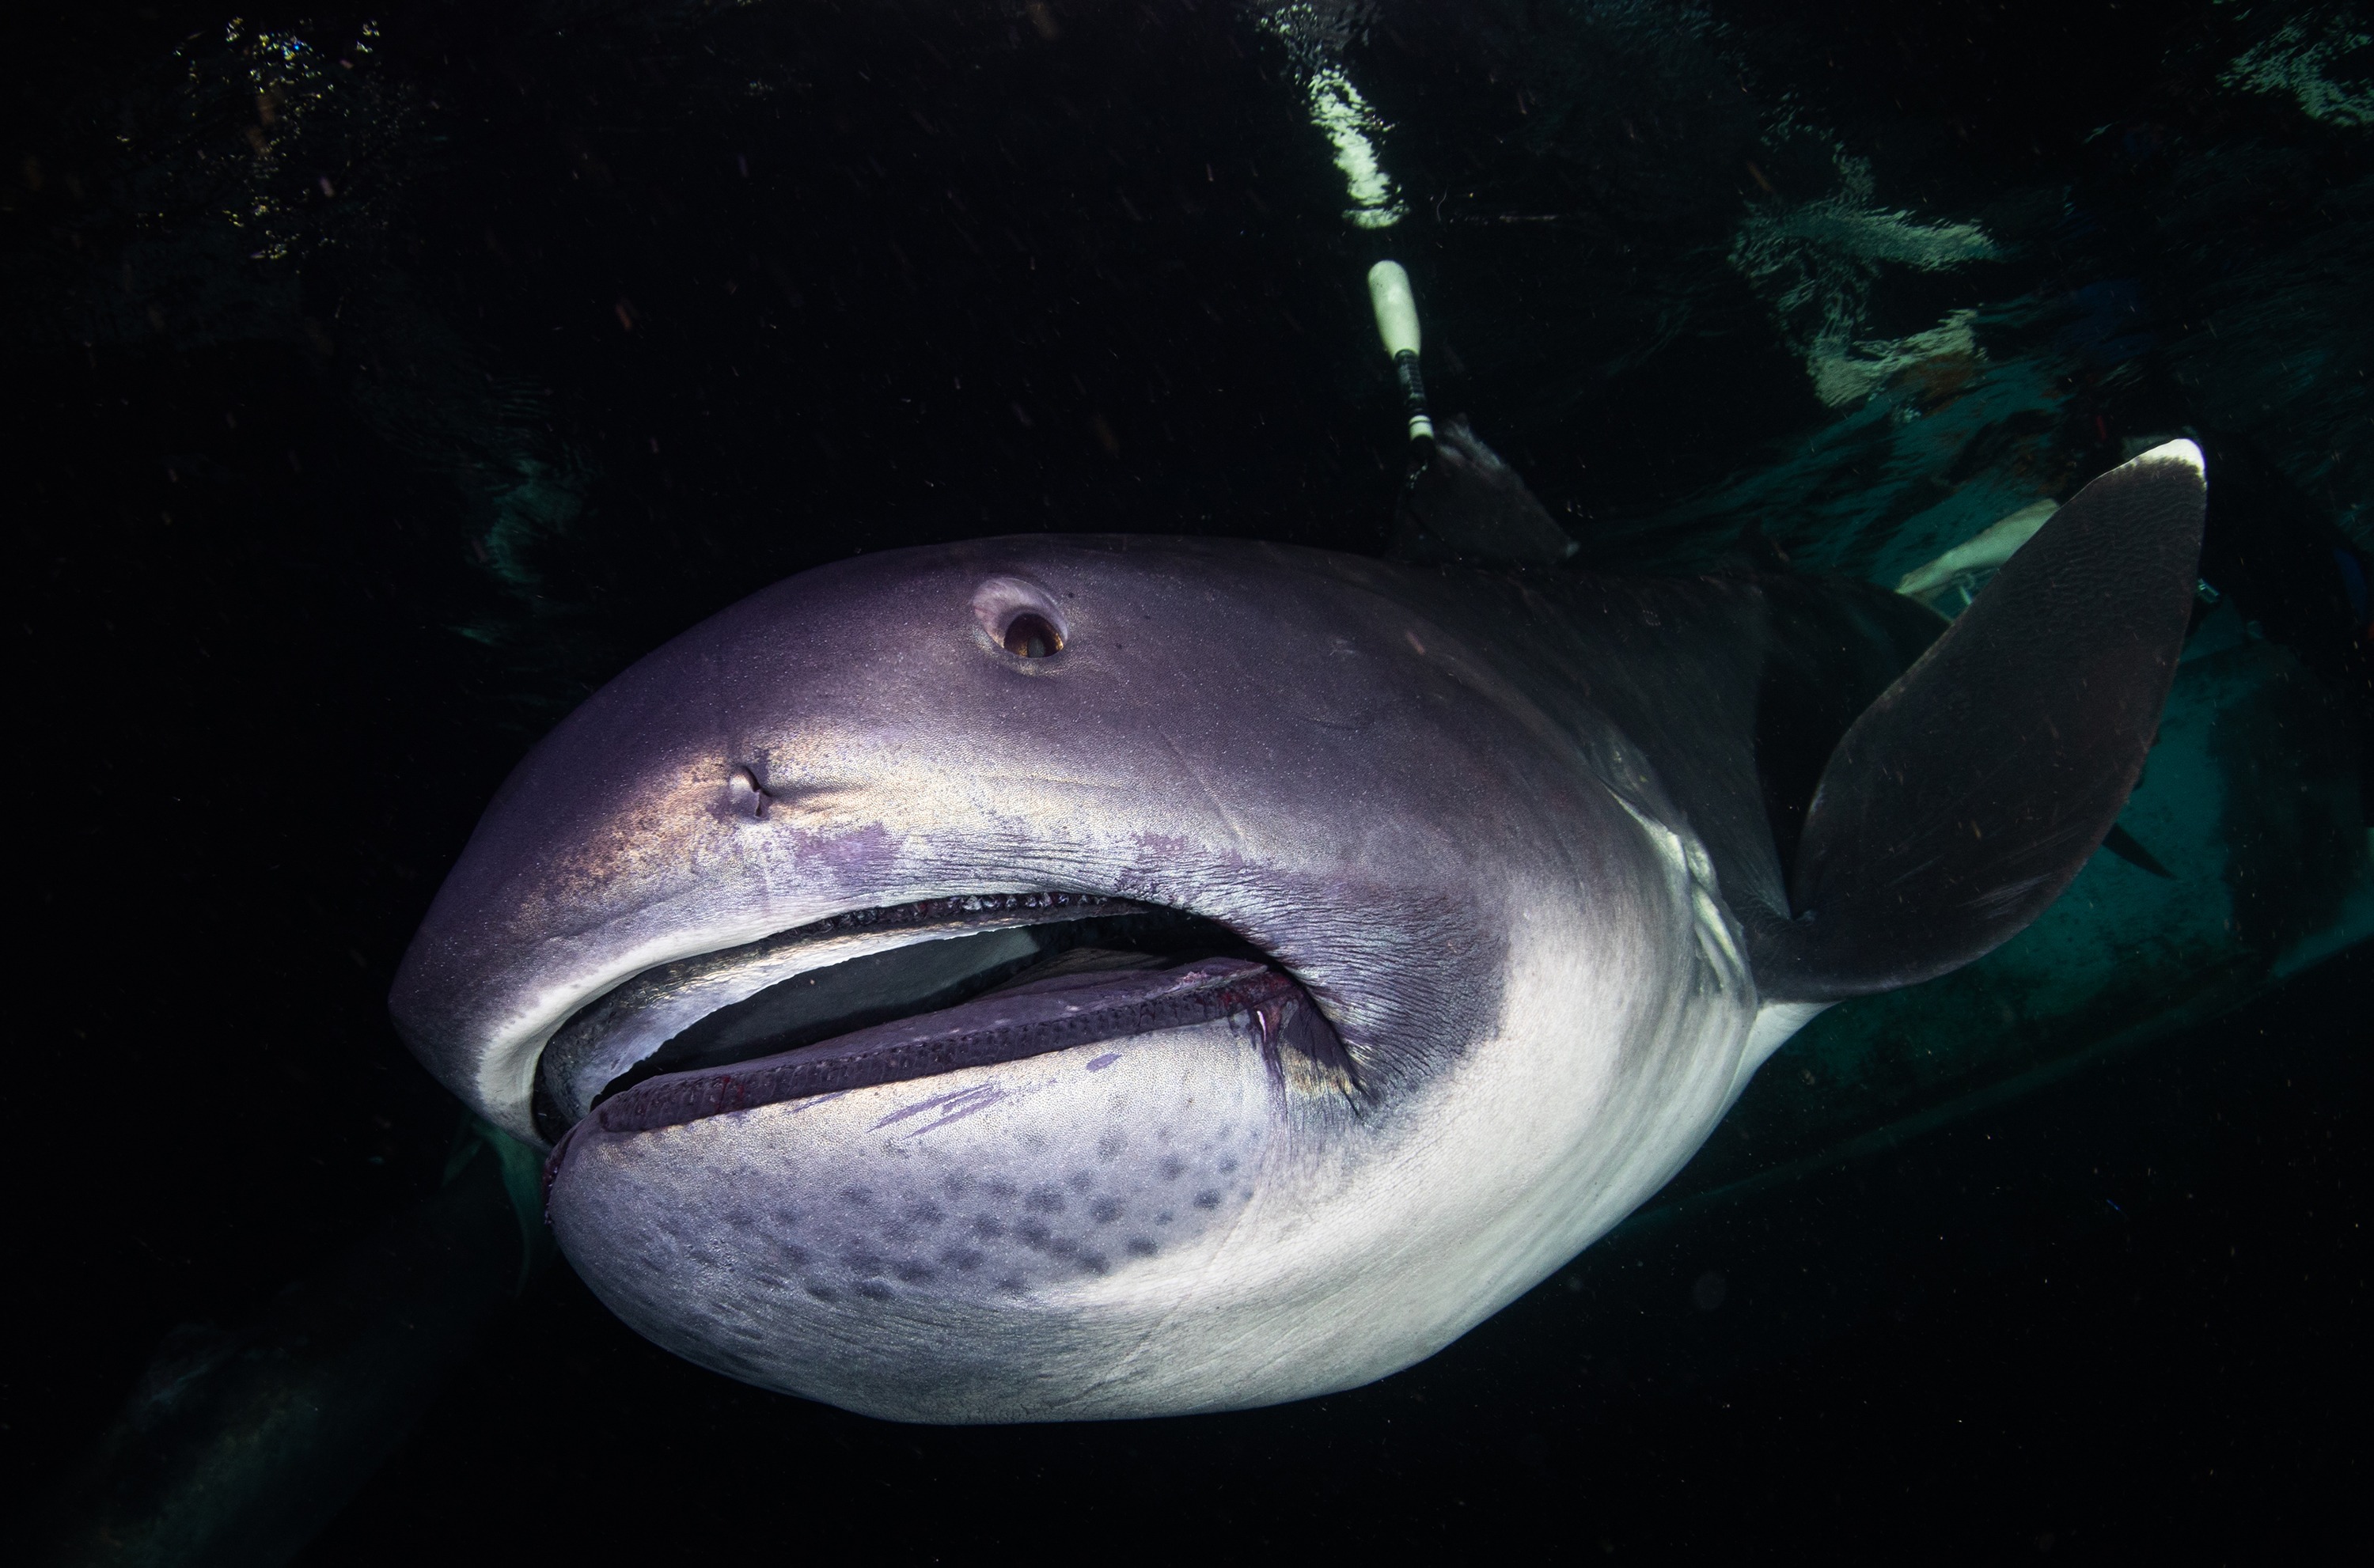 Zola Chen Captured The Fascinating and Ultra Rare Megamouth Shark